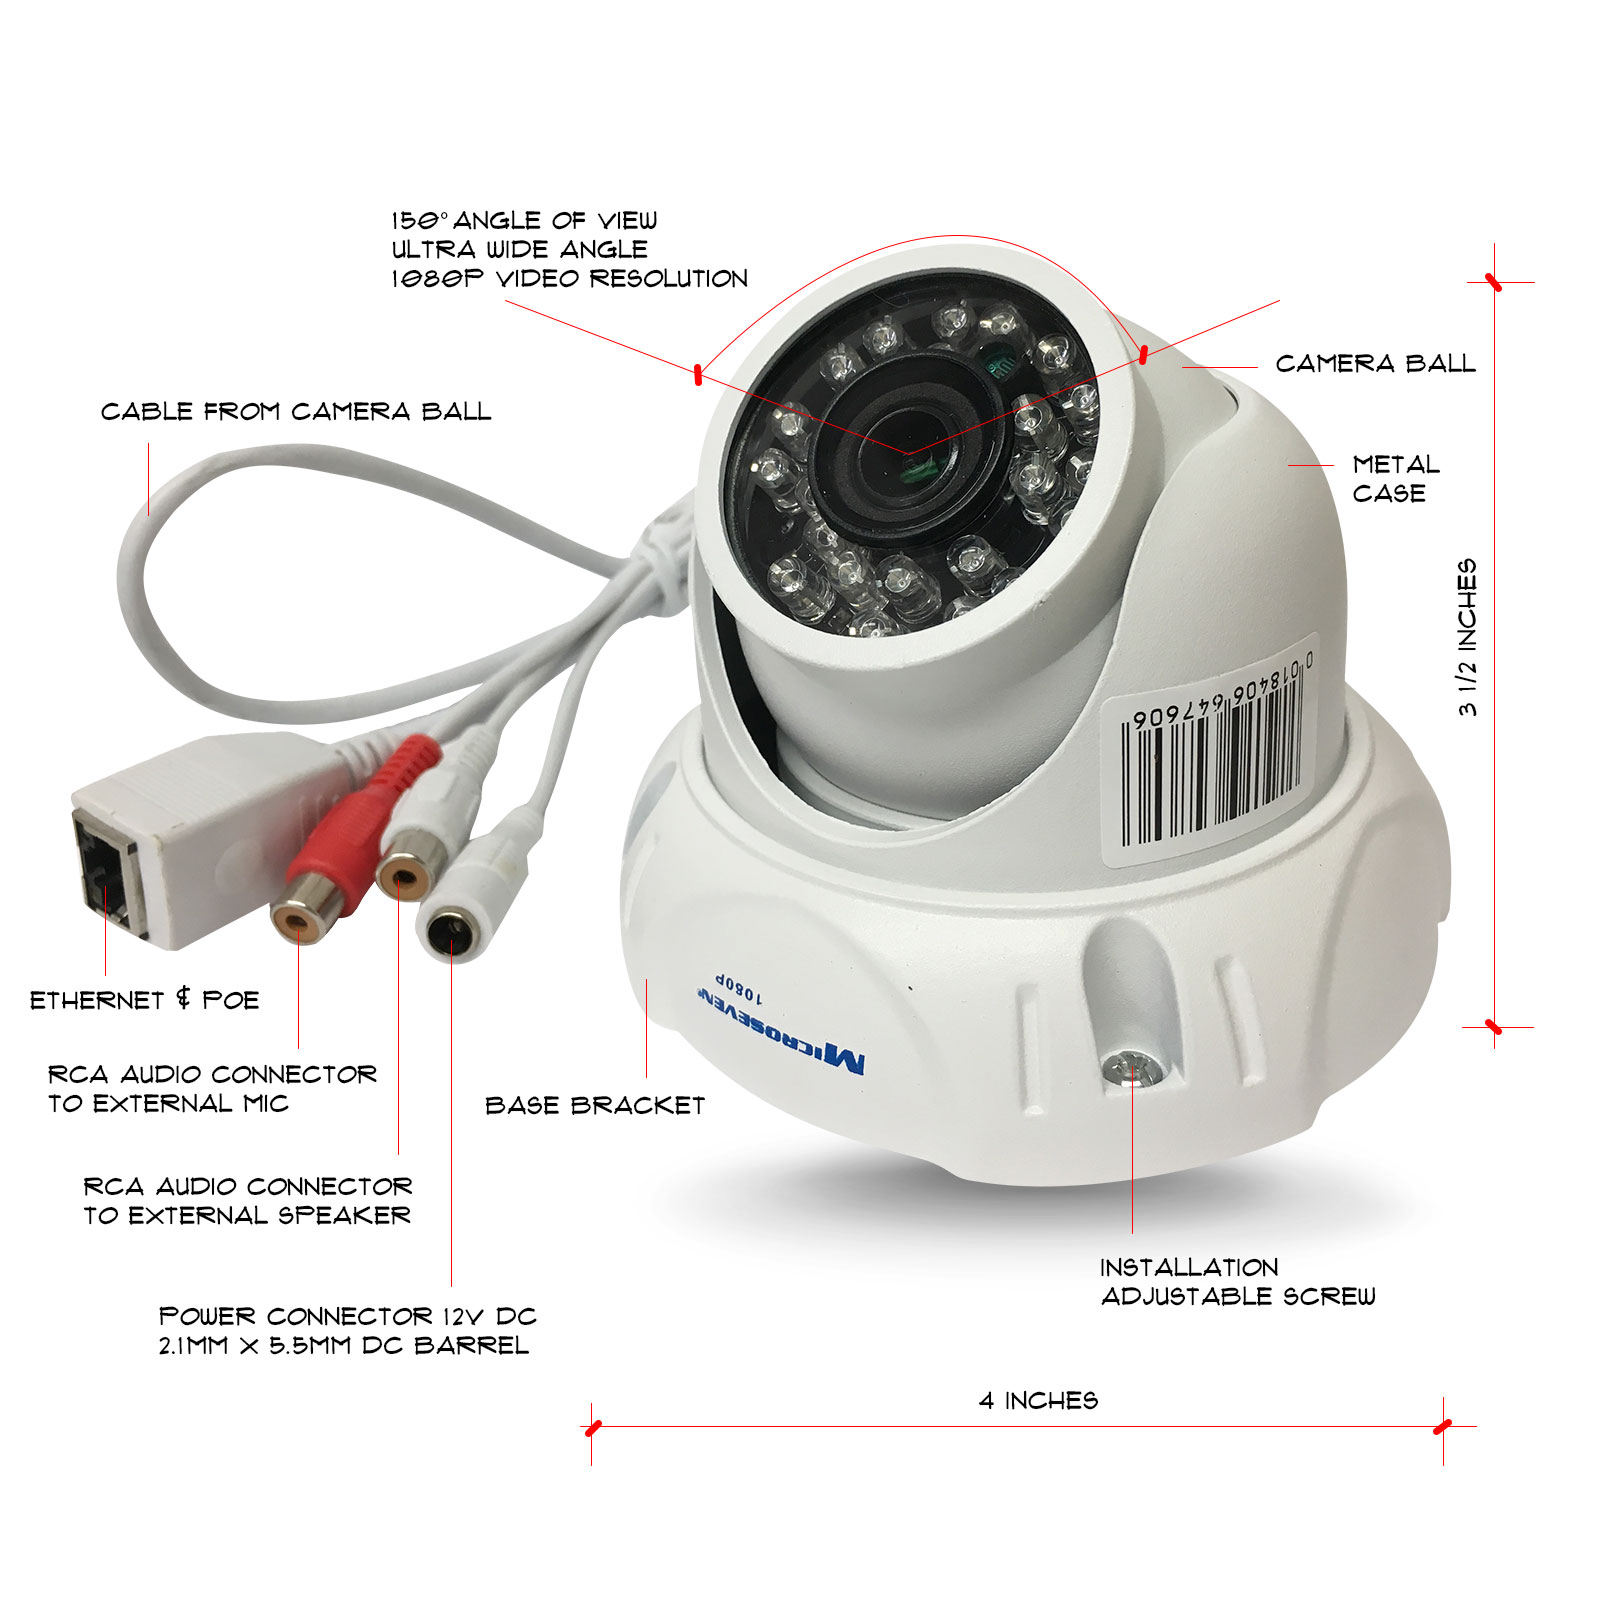 poe camera with two way audio